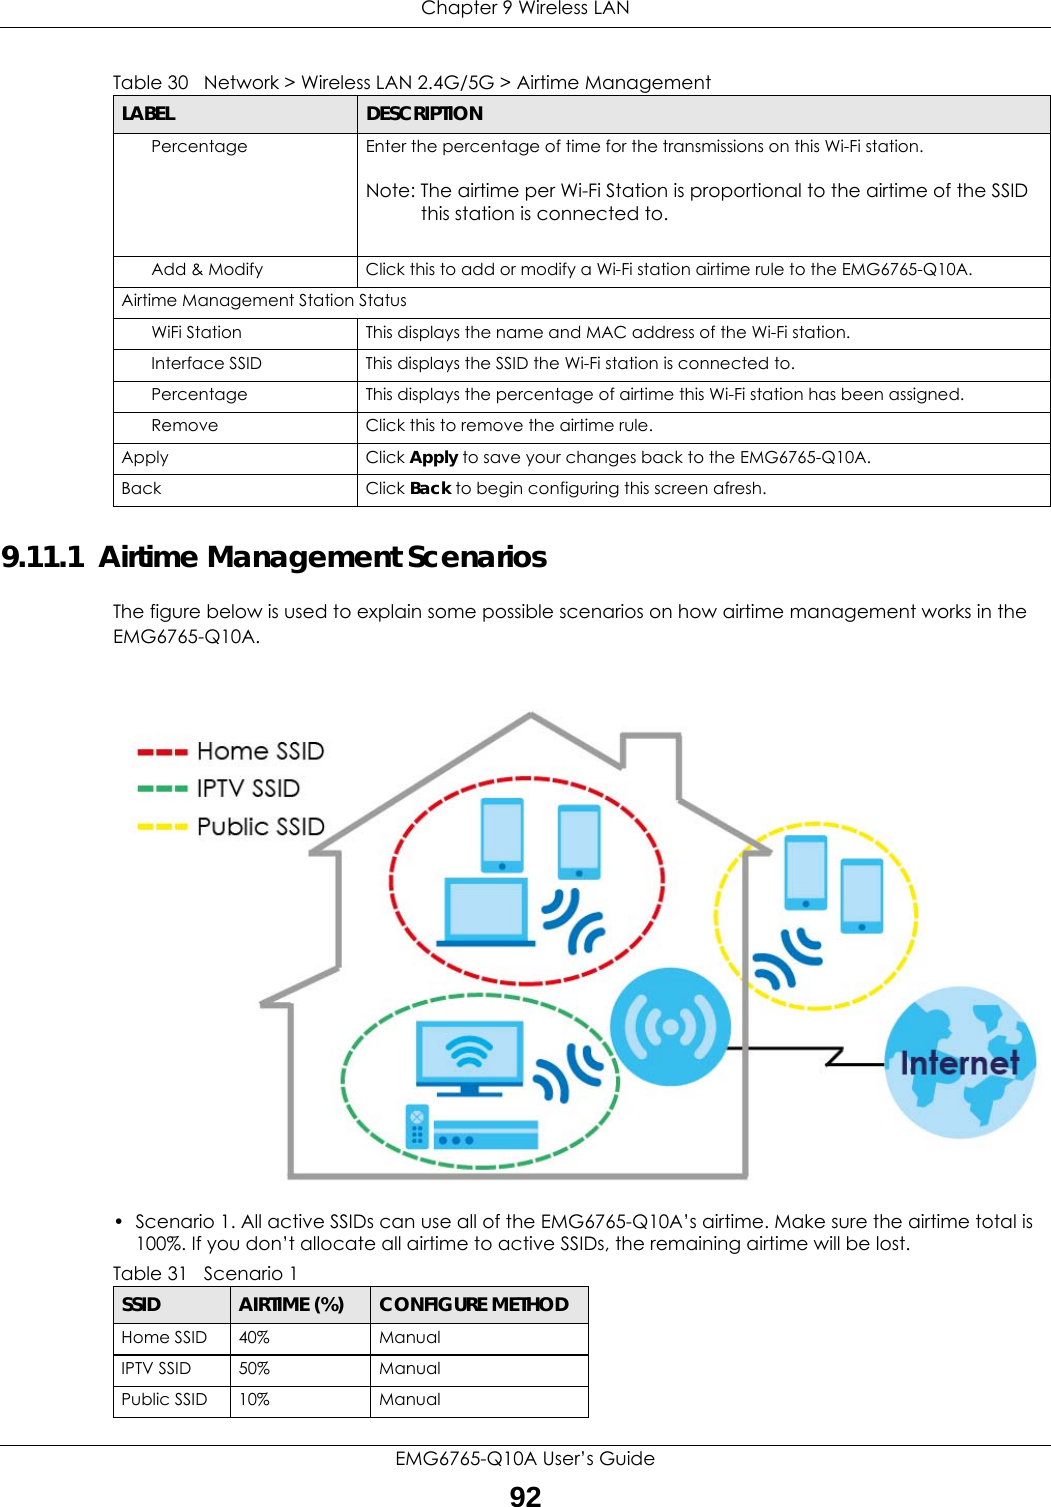 Chapter 9 Wireless LANEMG6765-Q10A User’s Guide929.11.1  Airtime Management ScenariosThe figure below is used to explain some possible scenarios on how airtime management works in the EMG6765-Q10A.• Scenario 1. All active SSIDs can use all of the EMG6765-Q10A’s airtime. Make sure the airtime total is 100%. If you don’t allocate all airtime to active SSIDs, the remaining airtime will be lost. Percentage Enter the percentage of time for the transmissions on this Wi-Fi station.Note: The airtime per Wi-Fi Station is proportional to the airtime of the SSID this station is connected to.Add &amp; Modify Click this to add or modify a Wi-Fi station airtime rule to the EMG6765-Q10A.Airtime Management Station StatusWiFi Station This displays the name and MAC address of the Wi-Fi station.Interface SSID This displays the SSID the Wi-Fi station is connected to.Percentage  This displays the percentage of airtime this Wi-Fi station has been assigned.Remove Click this to remove the airtime rule.Apply Click Apply to save your changes back to the EMG6765-Q10A.Back Click Back to begin configuring this screen afresh.Table 30   Network &gt; Wireless LAN 2.4G/5G &gt; Airtime ManagementLABEL DESCRIPTIONTable 31   Scenario 1SSID AIRTIME (%) CONFIGURE METHODHome SSID 40% ManualIPTV SSID 50% ManualPublic SSID 10% Manual